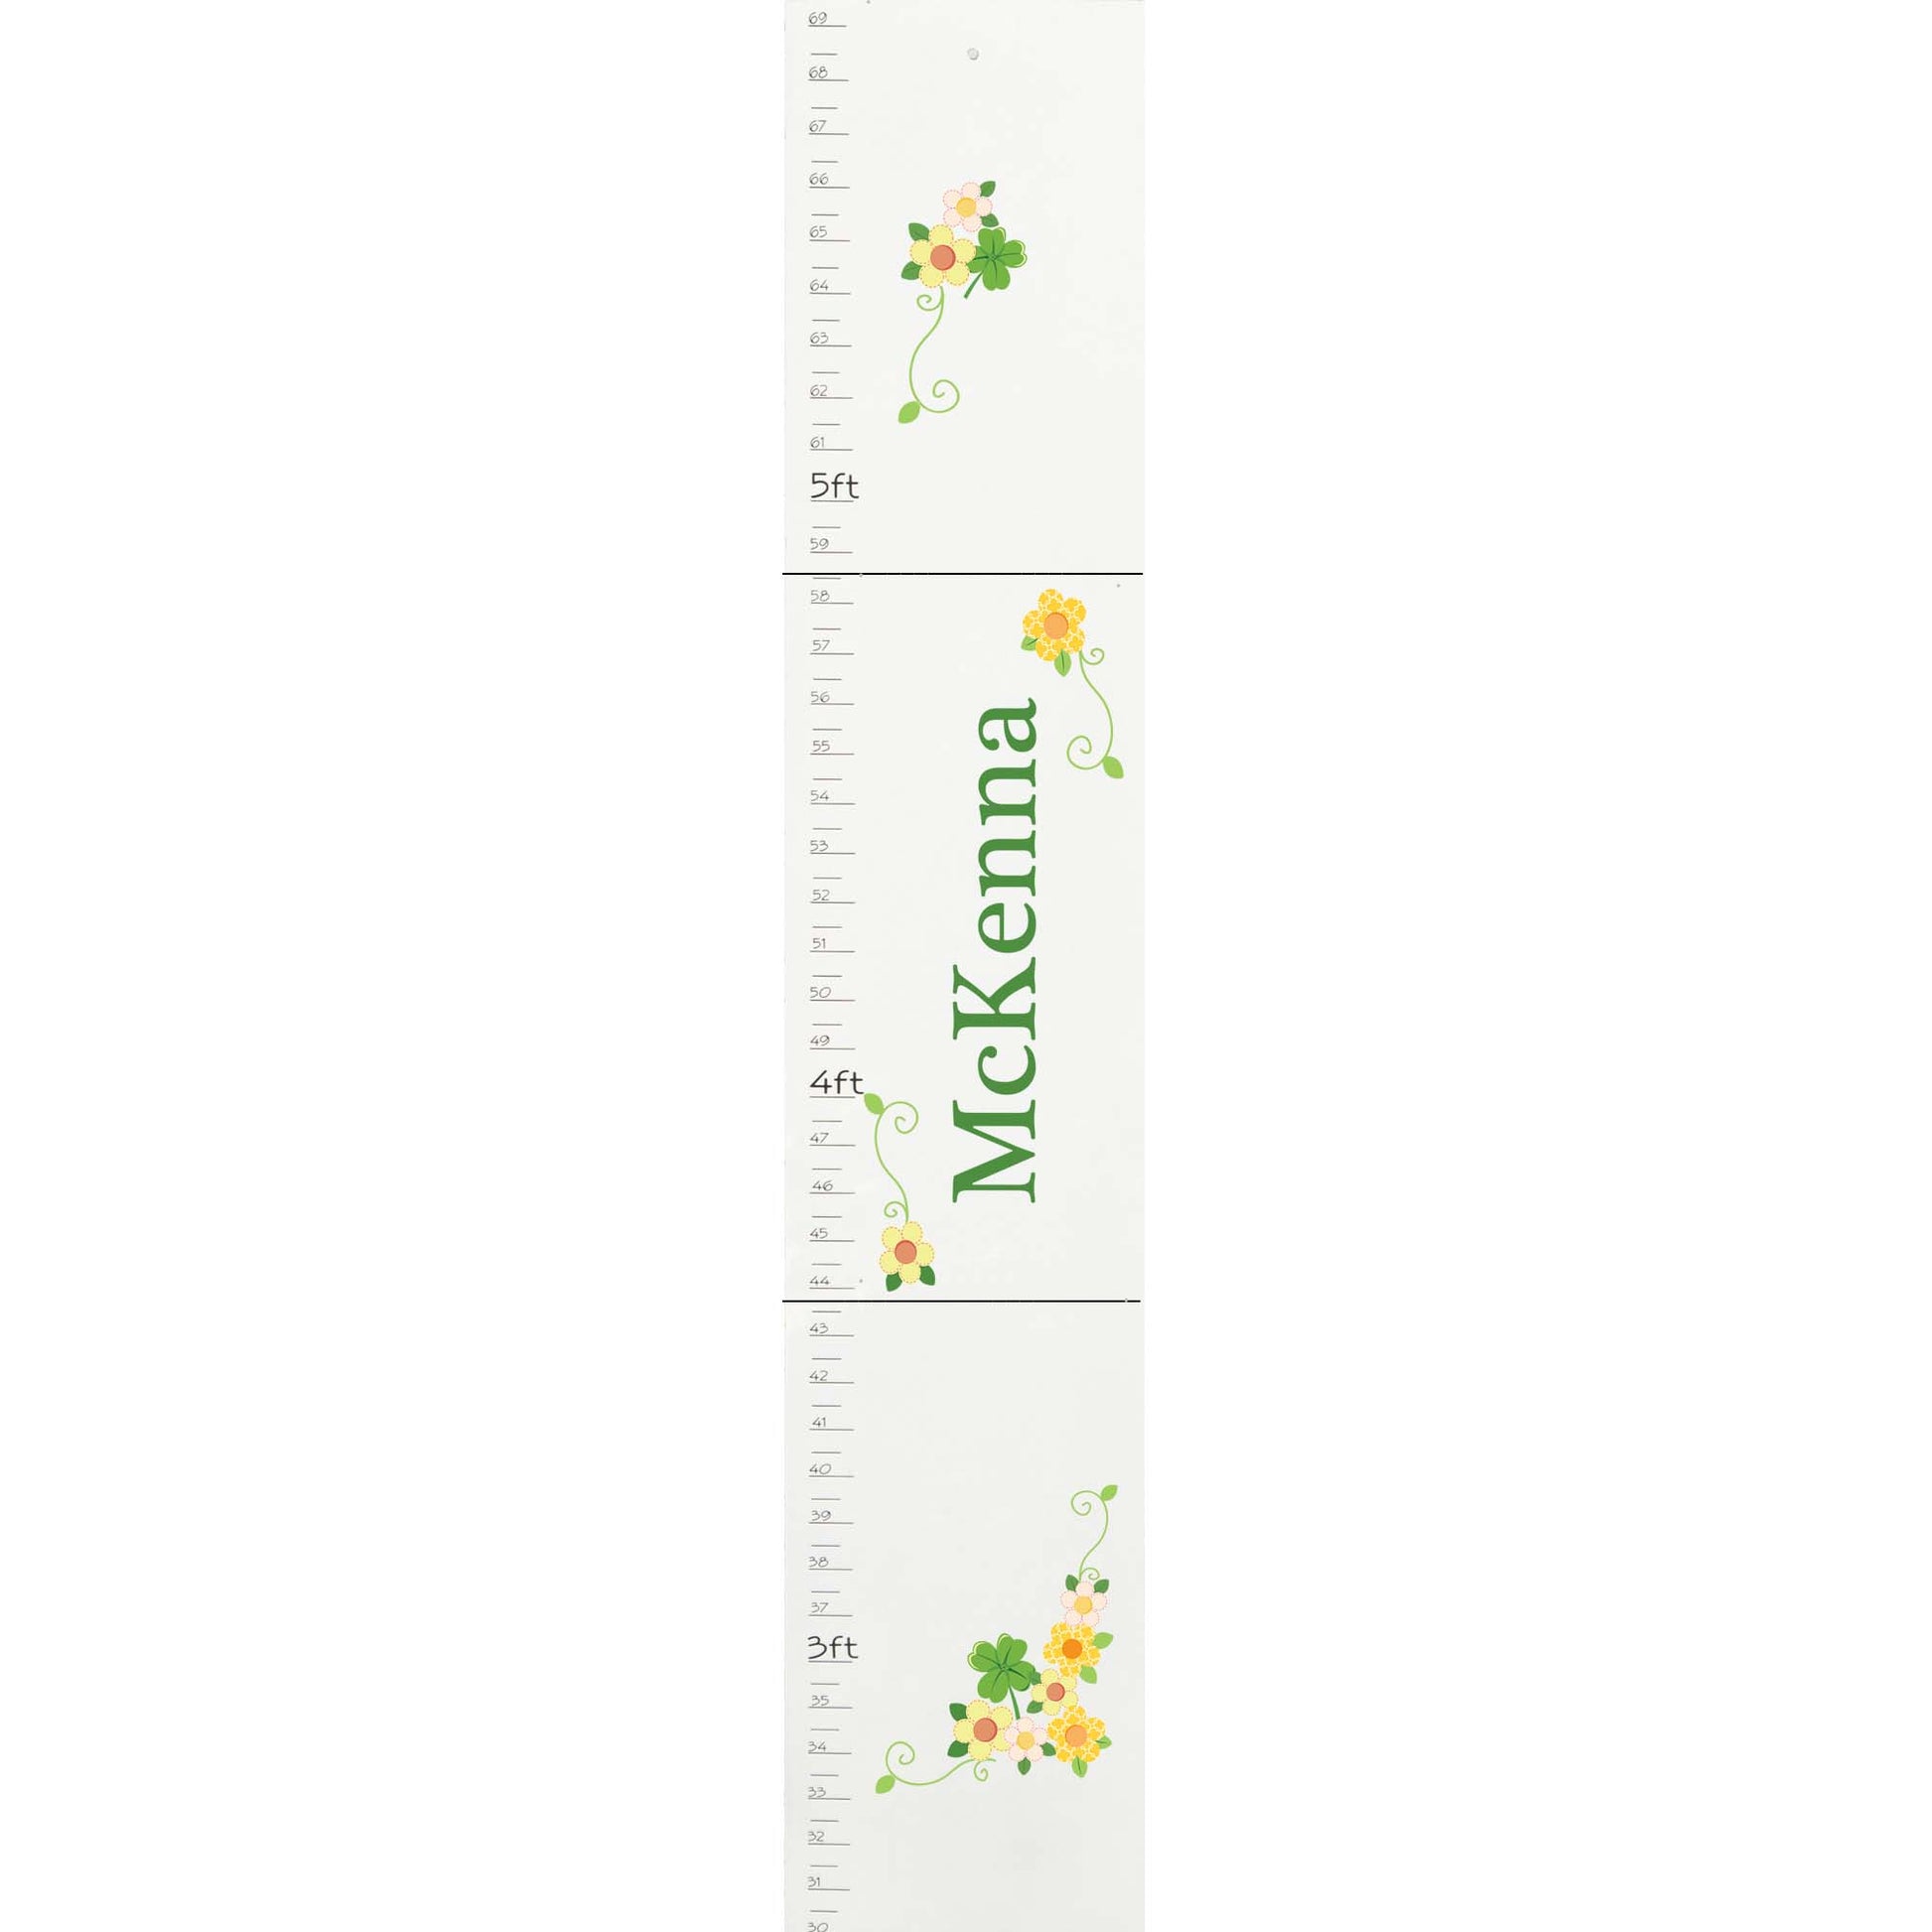 Personalized White Growth Chart With Monkey Girl Design